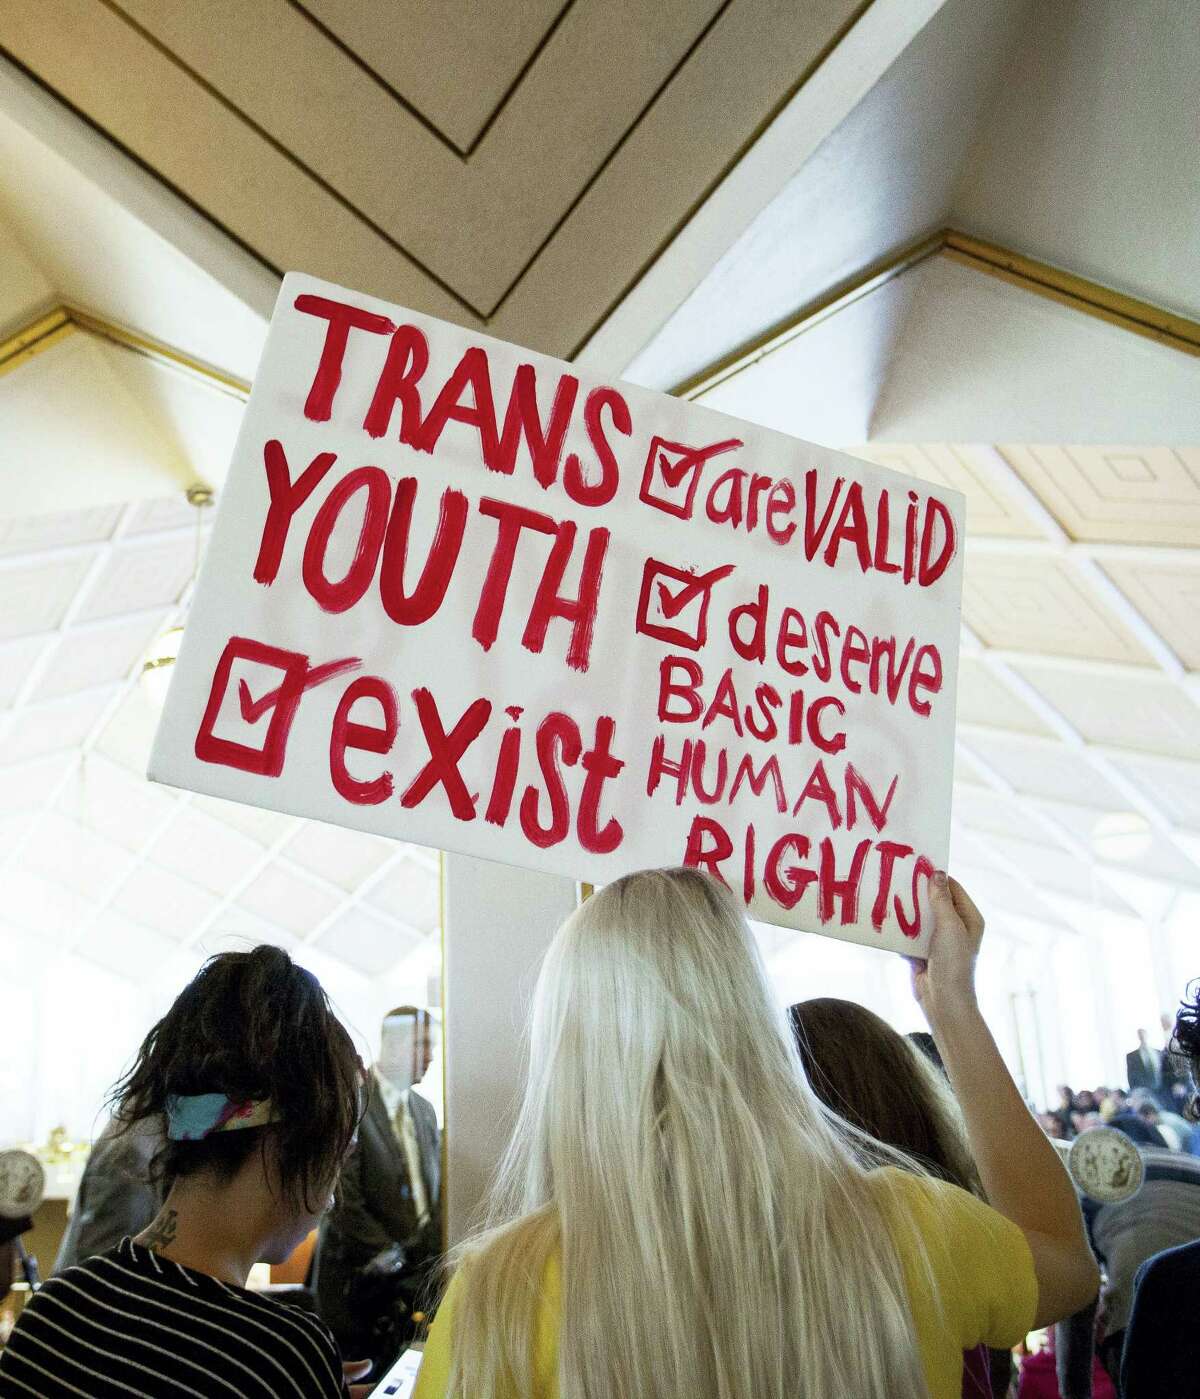 Hunter Schafer, of Raleigh, holds a sign in favor of repealing North Carolina HB2 during a special session of the North Carolina General Assembly in Raleigh, N.C., Wednesday, Dec. 21, 2016. North Carolina’s legislature is reconvening to see if enough lawmakers are willing to repeal the 9-month-old law that limited LGBT rights, including which bathrooms transgender people can use in public schools and government buildings.